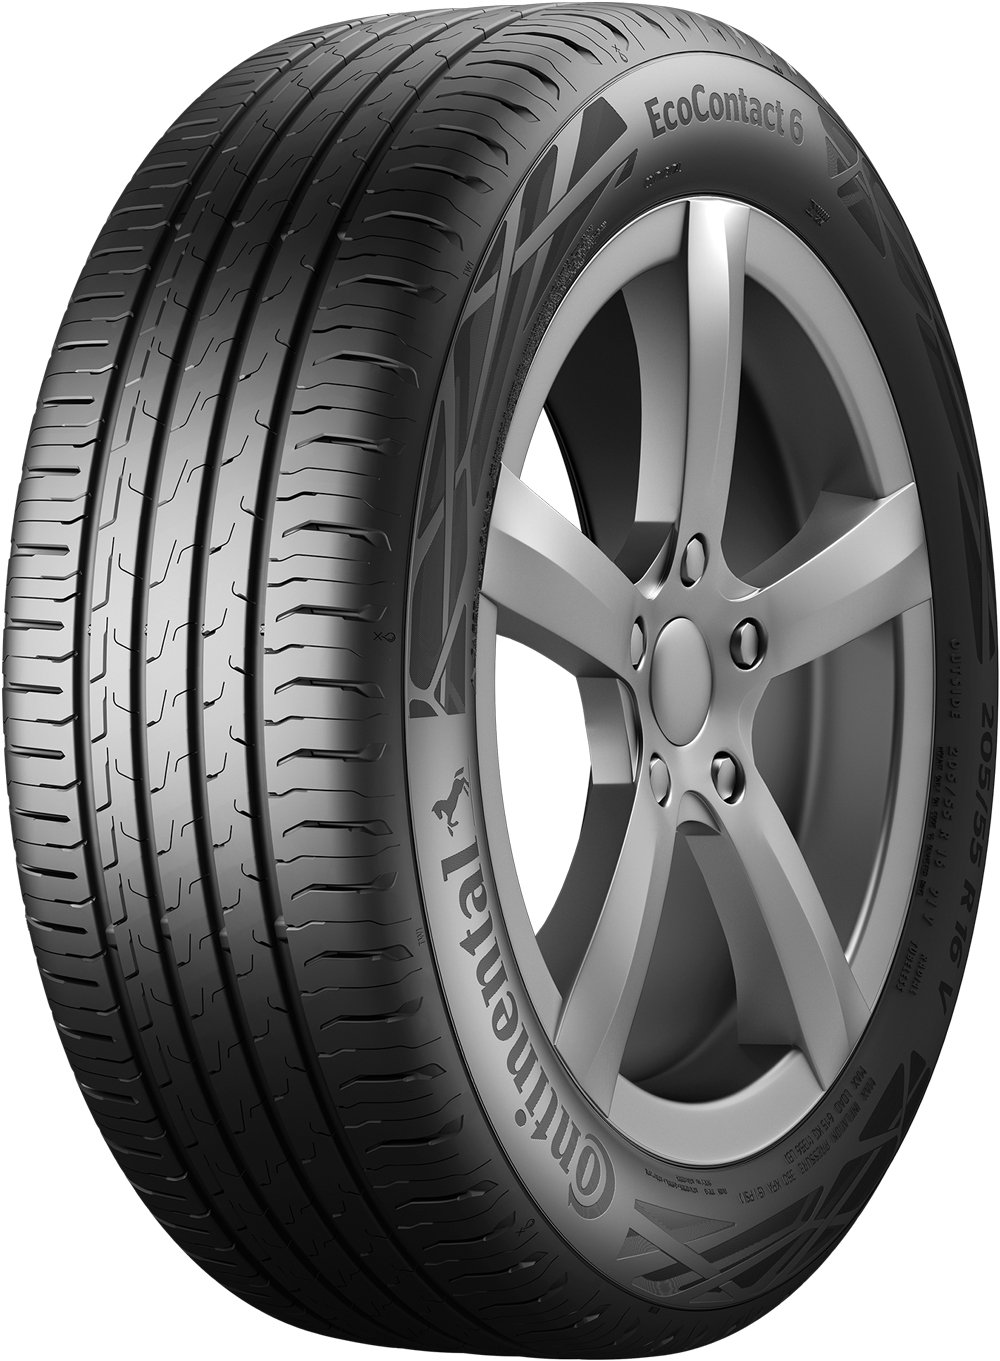 Anvelope auto CONTINENTAL ECO 6 XL 205/55 R16 94V